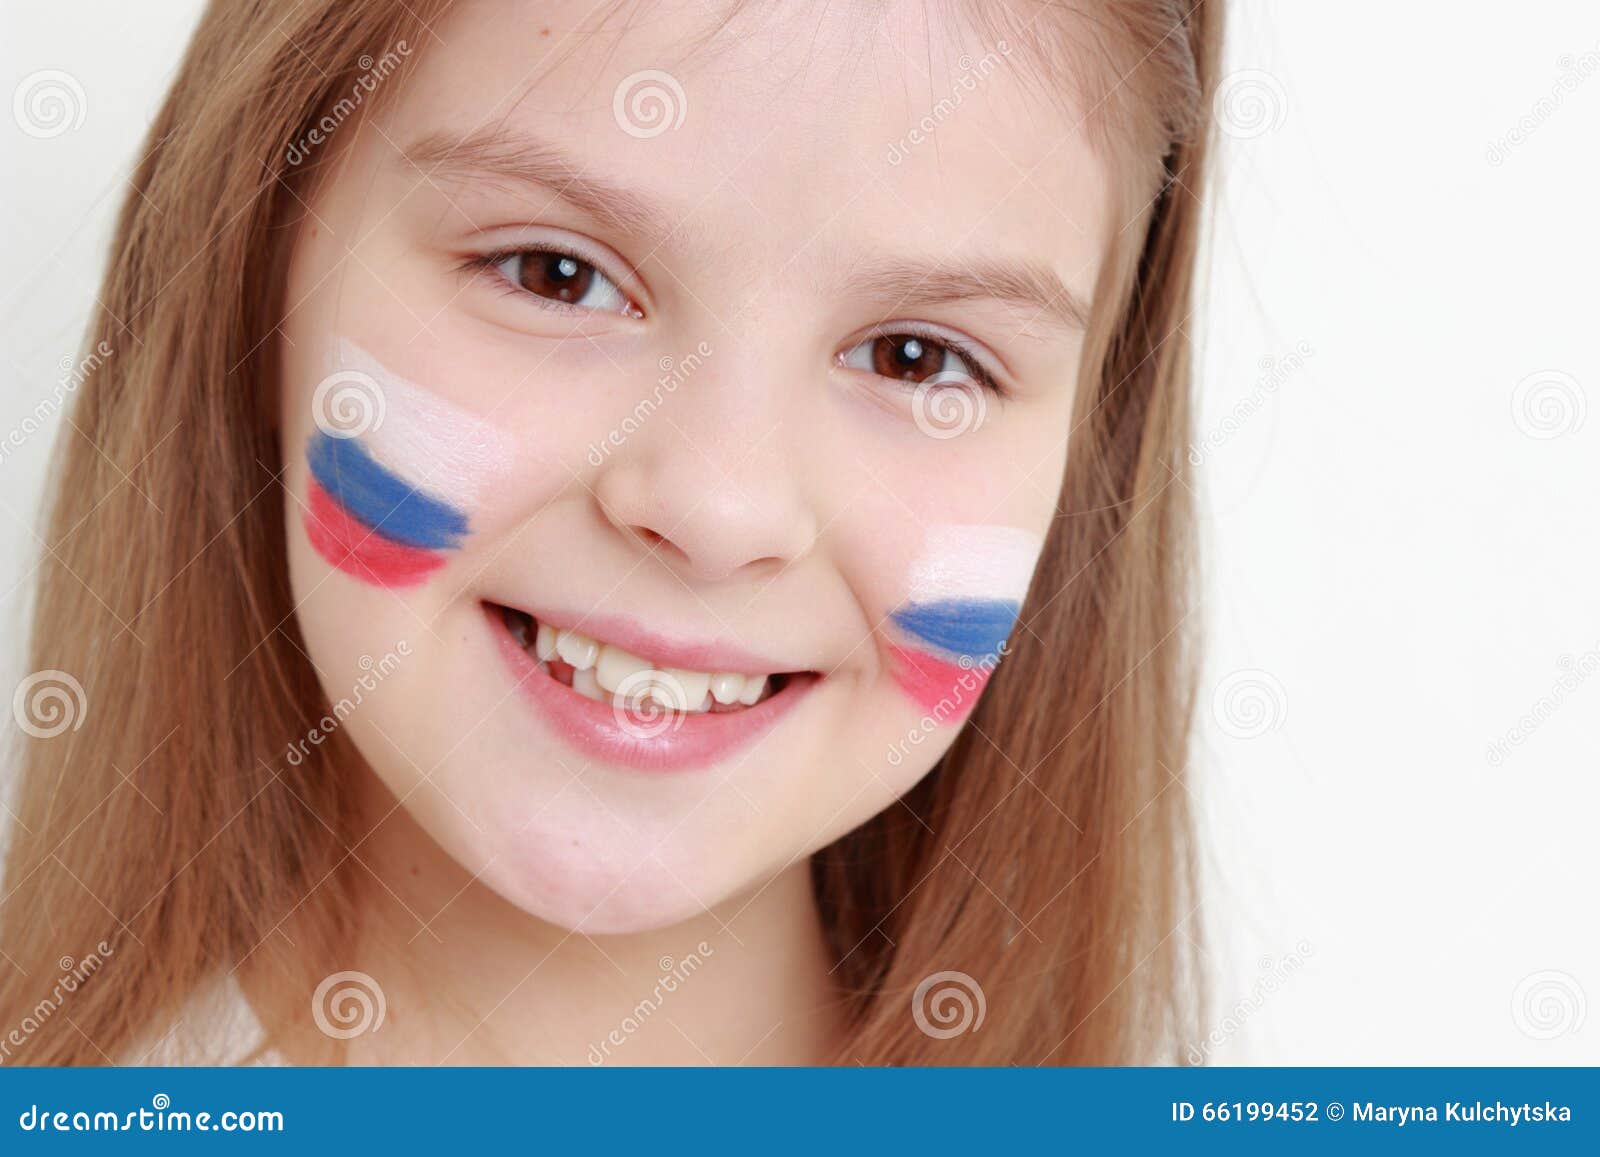 Kid and Russian flag stock photo. Image of portrait, girl - 66199452